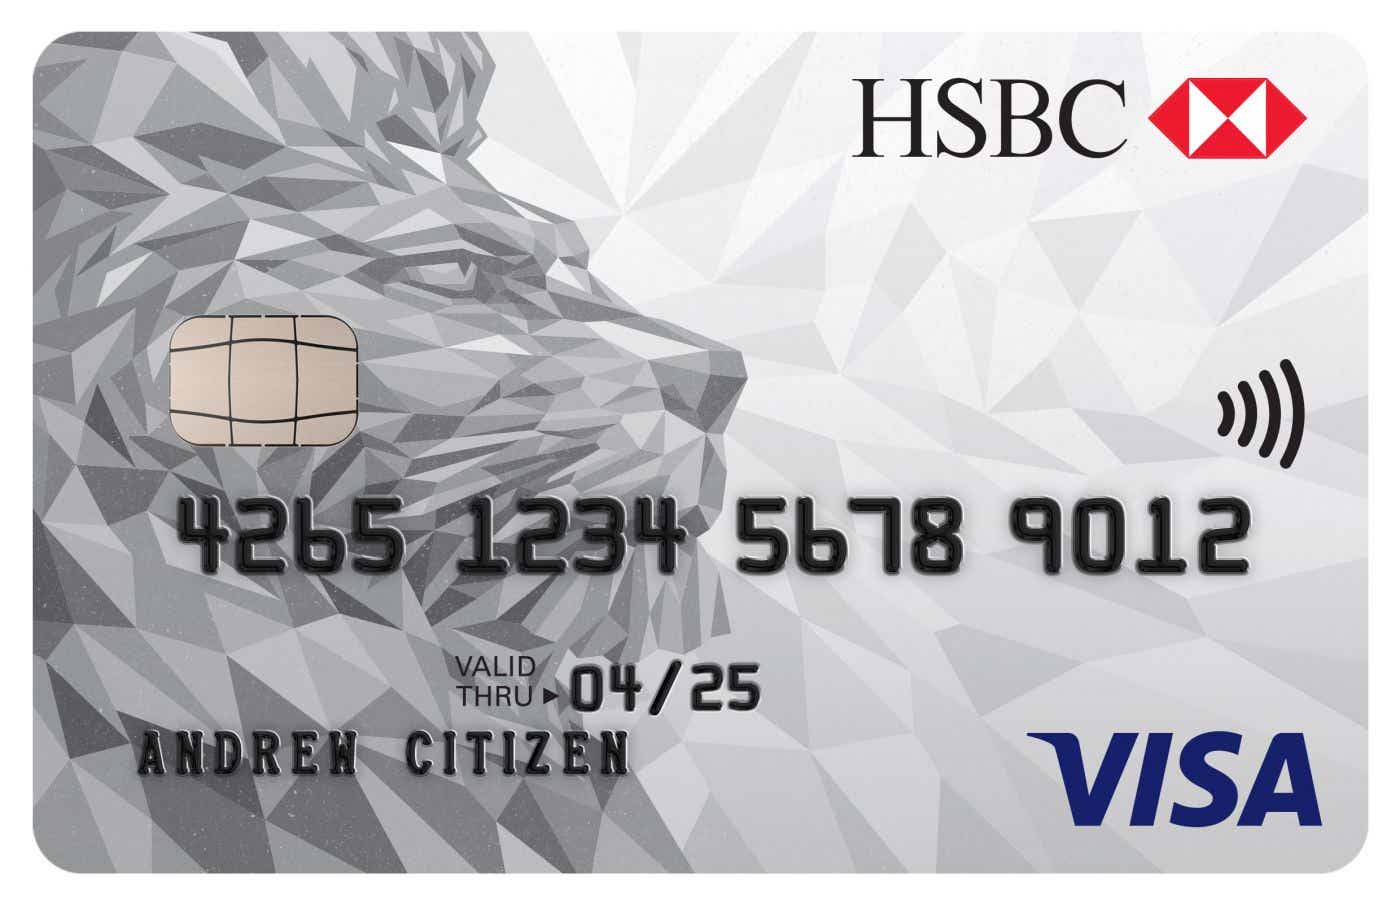 HSBC Credit Cards - Review & Compare | Canstar